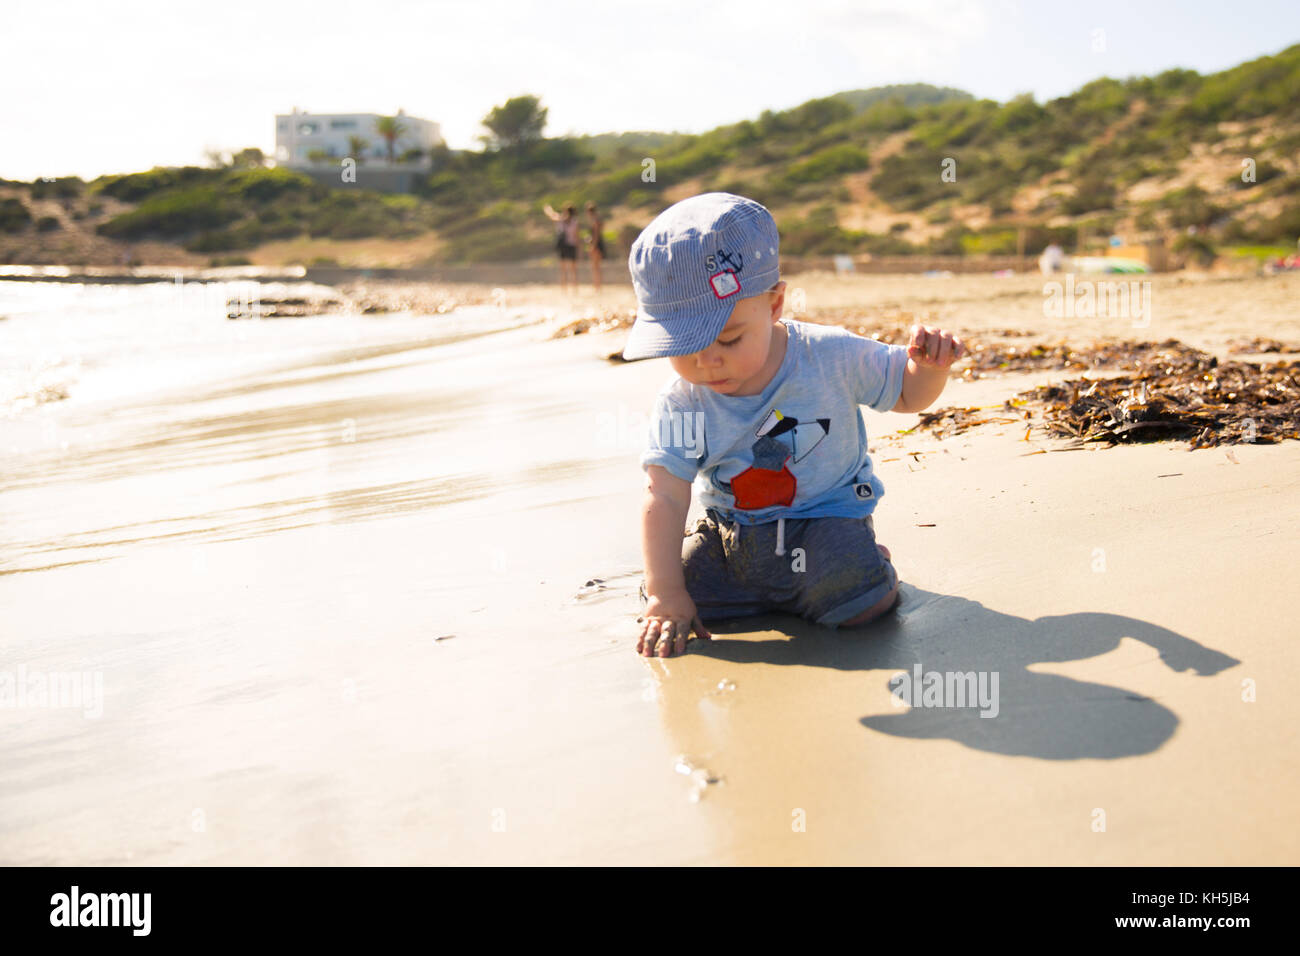 A young child playing on the beach Stock Photo